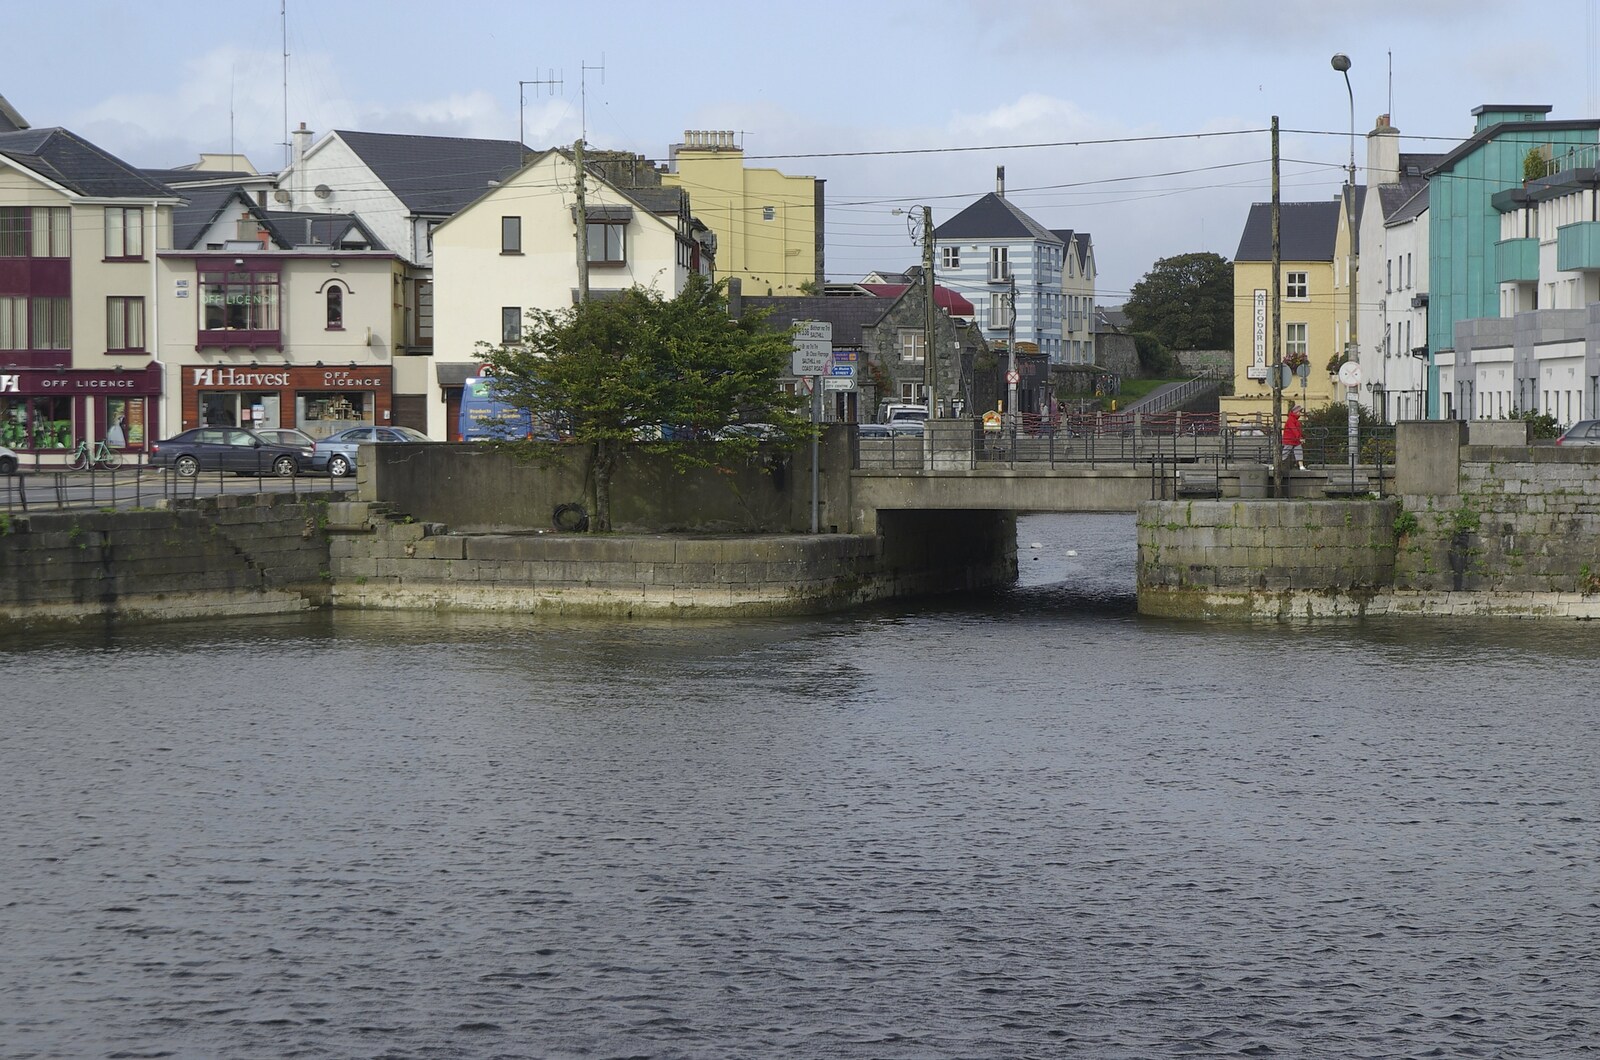 Kilkee to Galway, Connacht, Ireland - 23rd September 2007: The small road bridge near the hotel